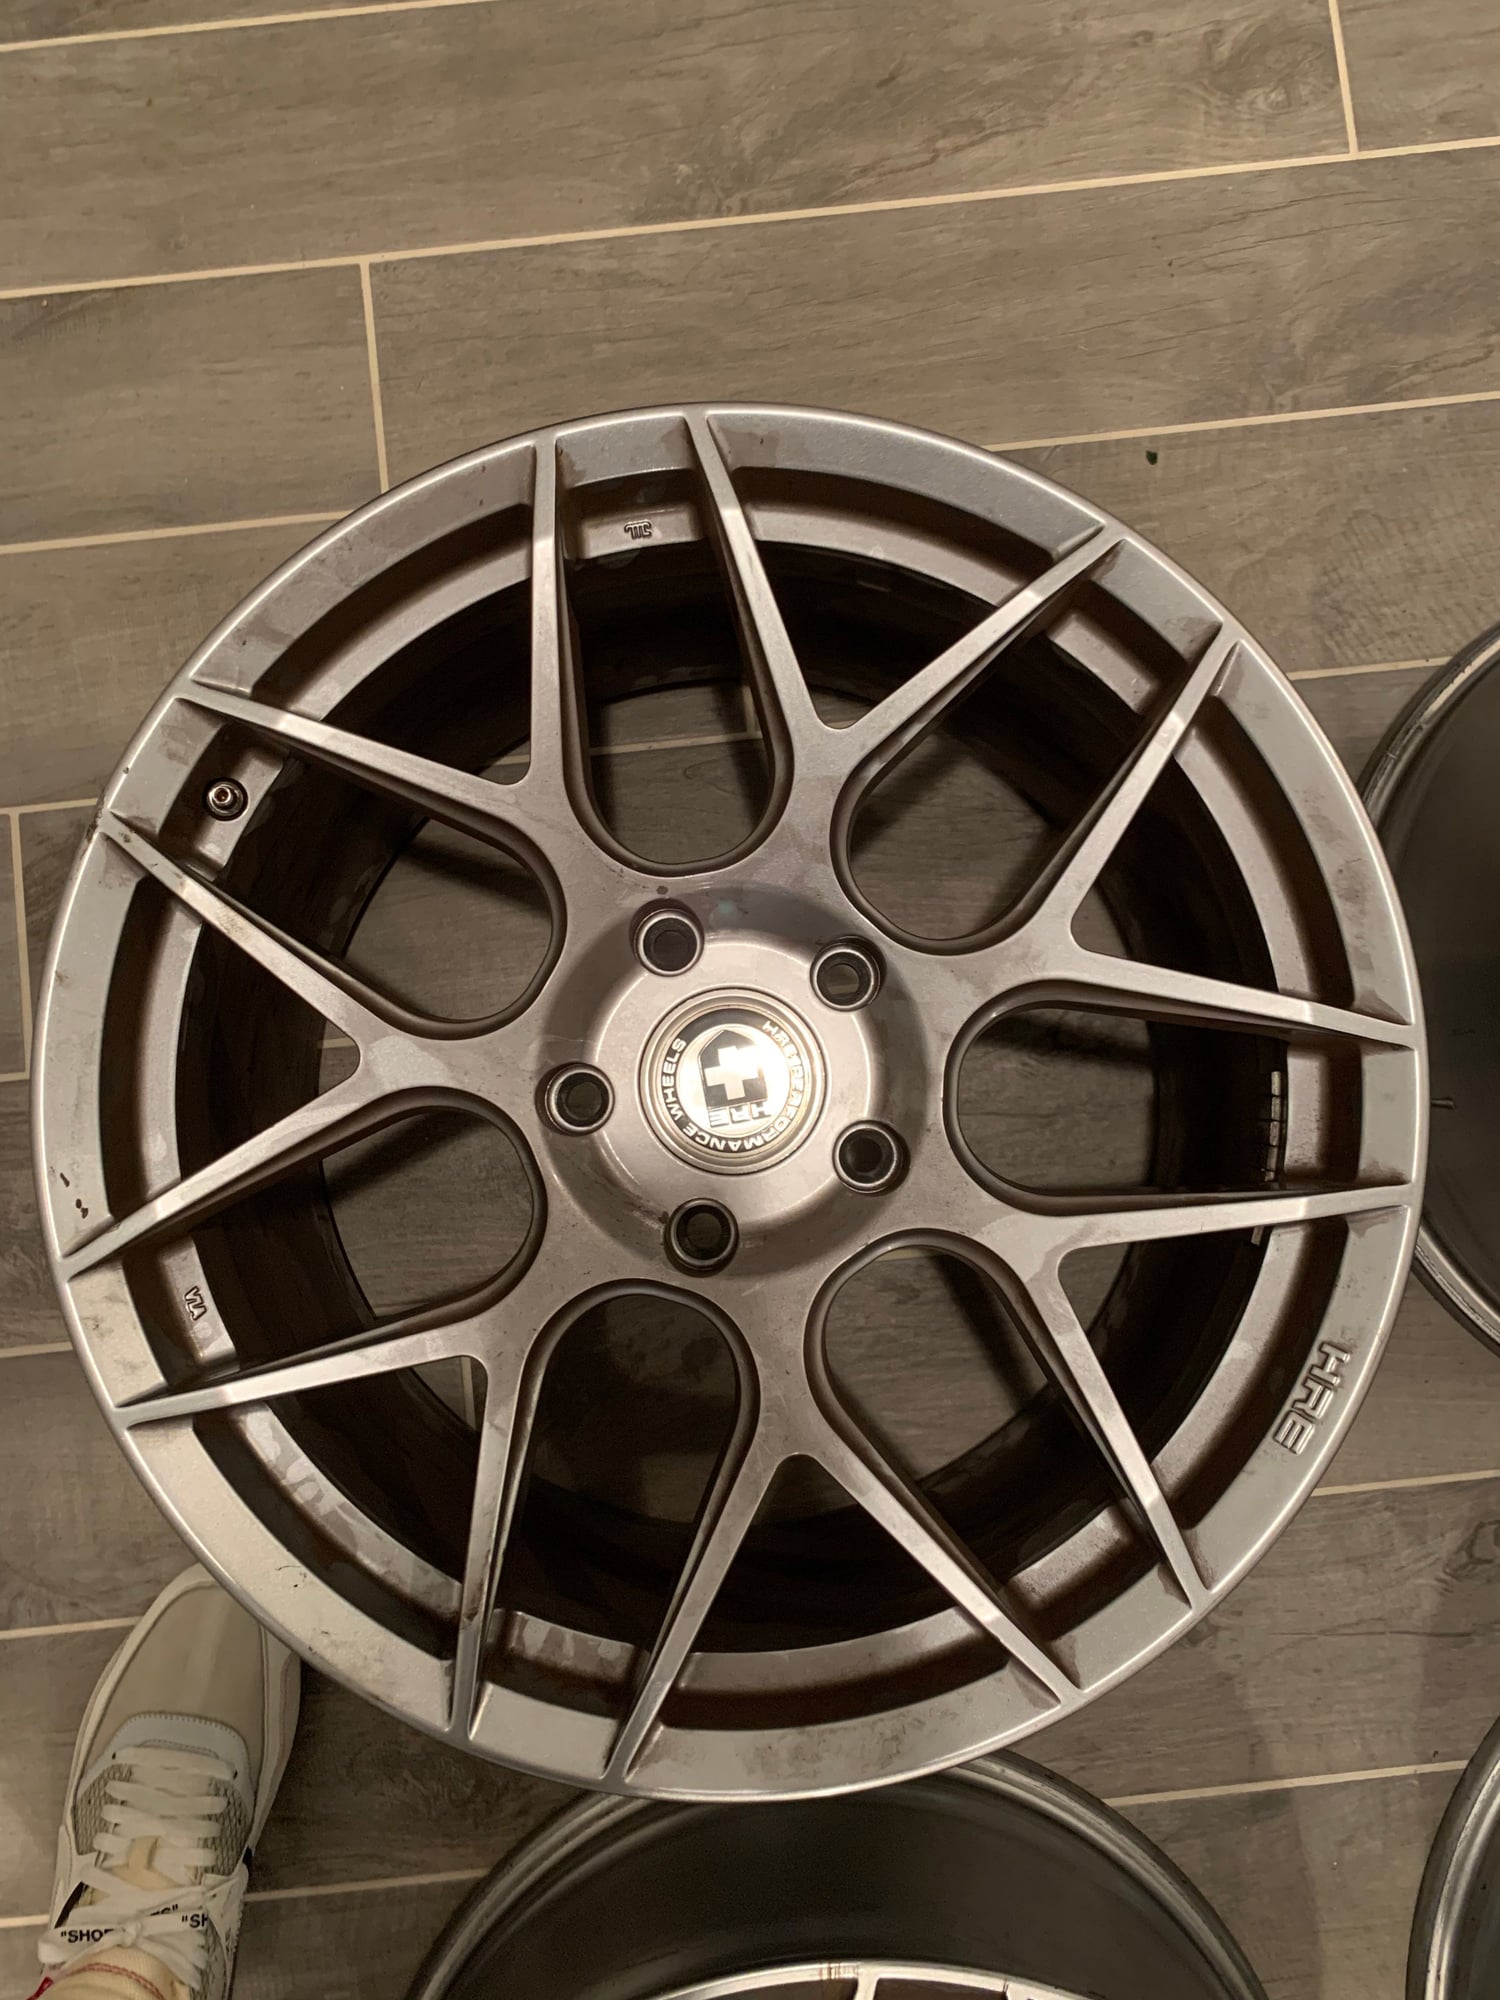 Wheels and Tires/Axles - FS: HRE FF01 19" Wheels in Liquid Silver - Used - 2005 to 2012 Porsche 911 - Houston, TX 77003, United States